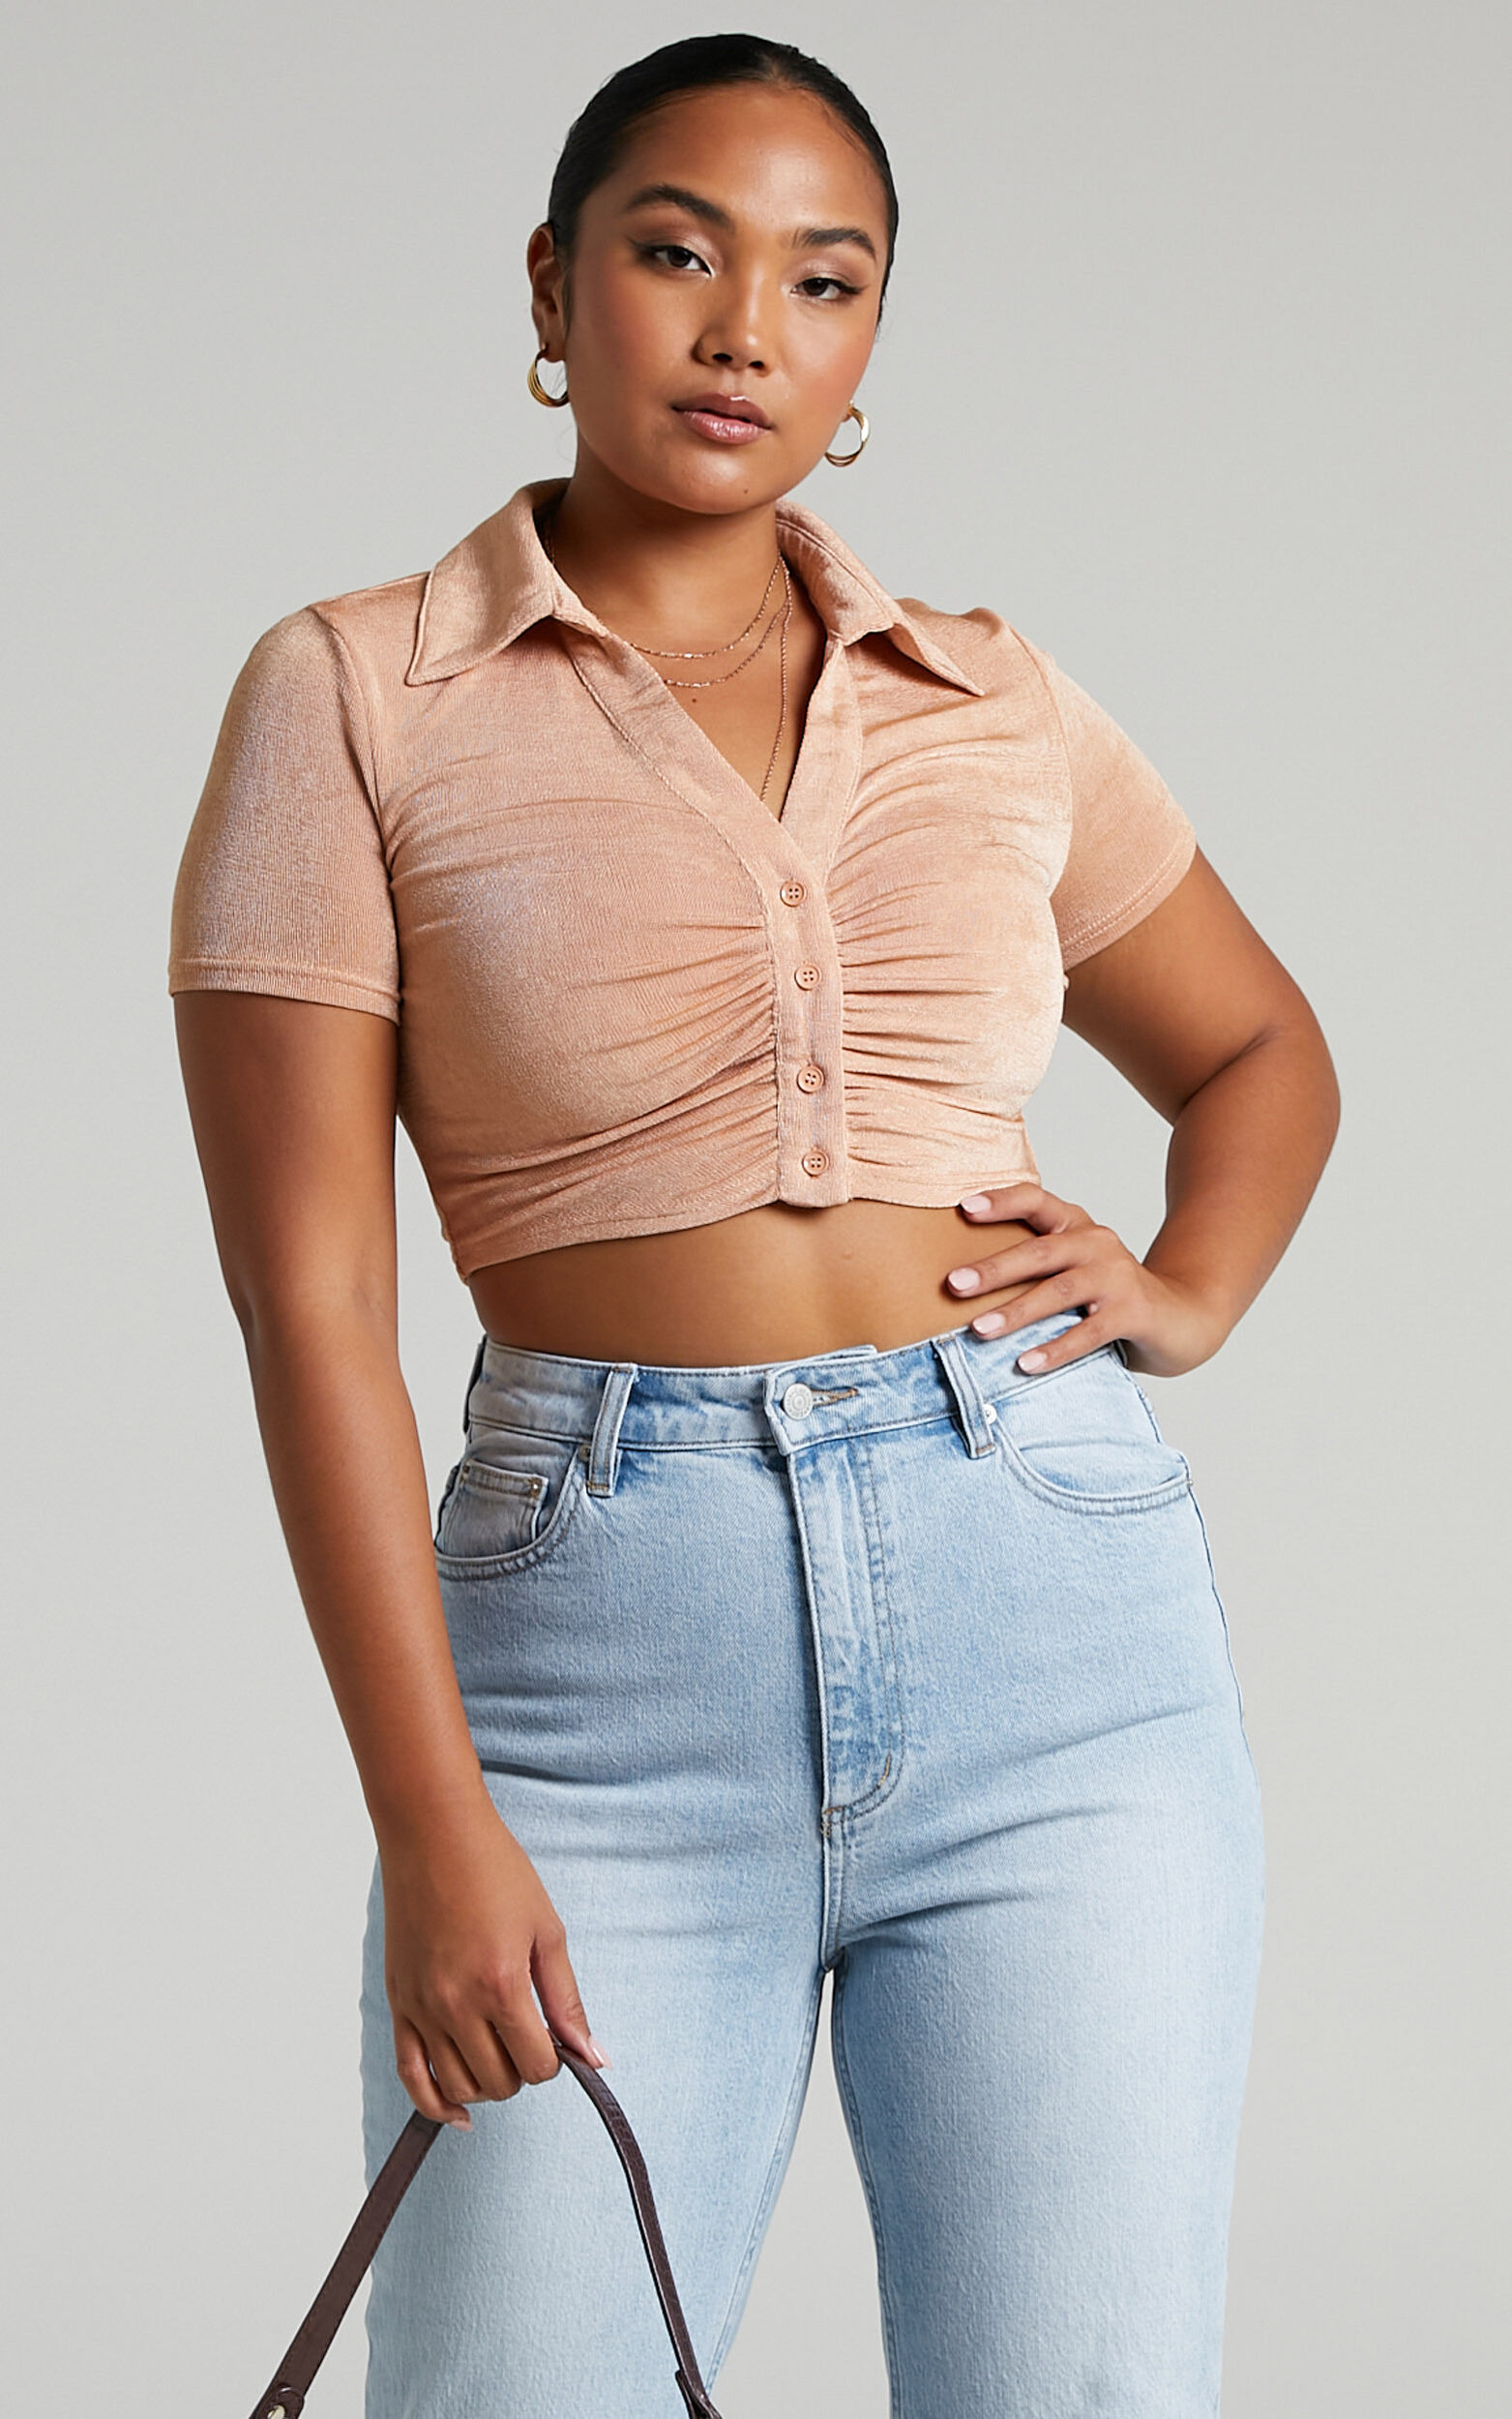 Dolly Top - Button Up Slinky Short Sleeve Crop Top in Sand